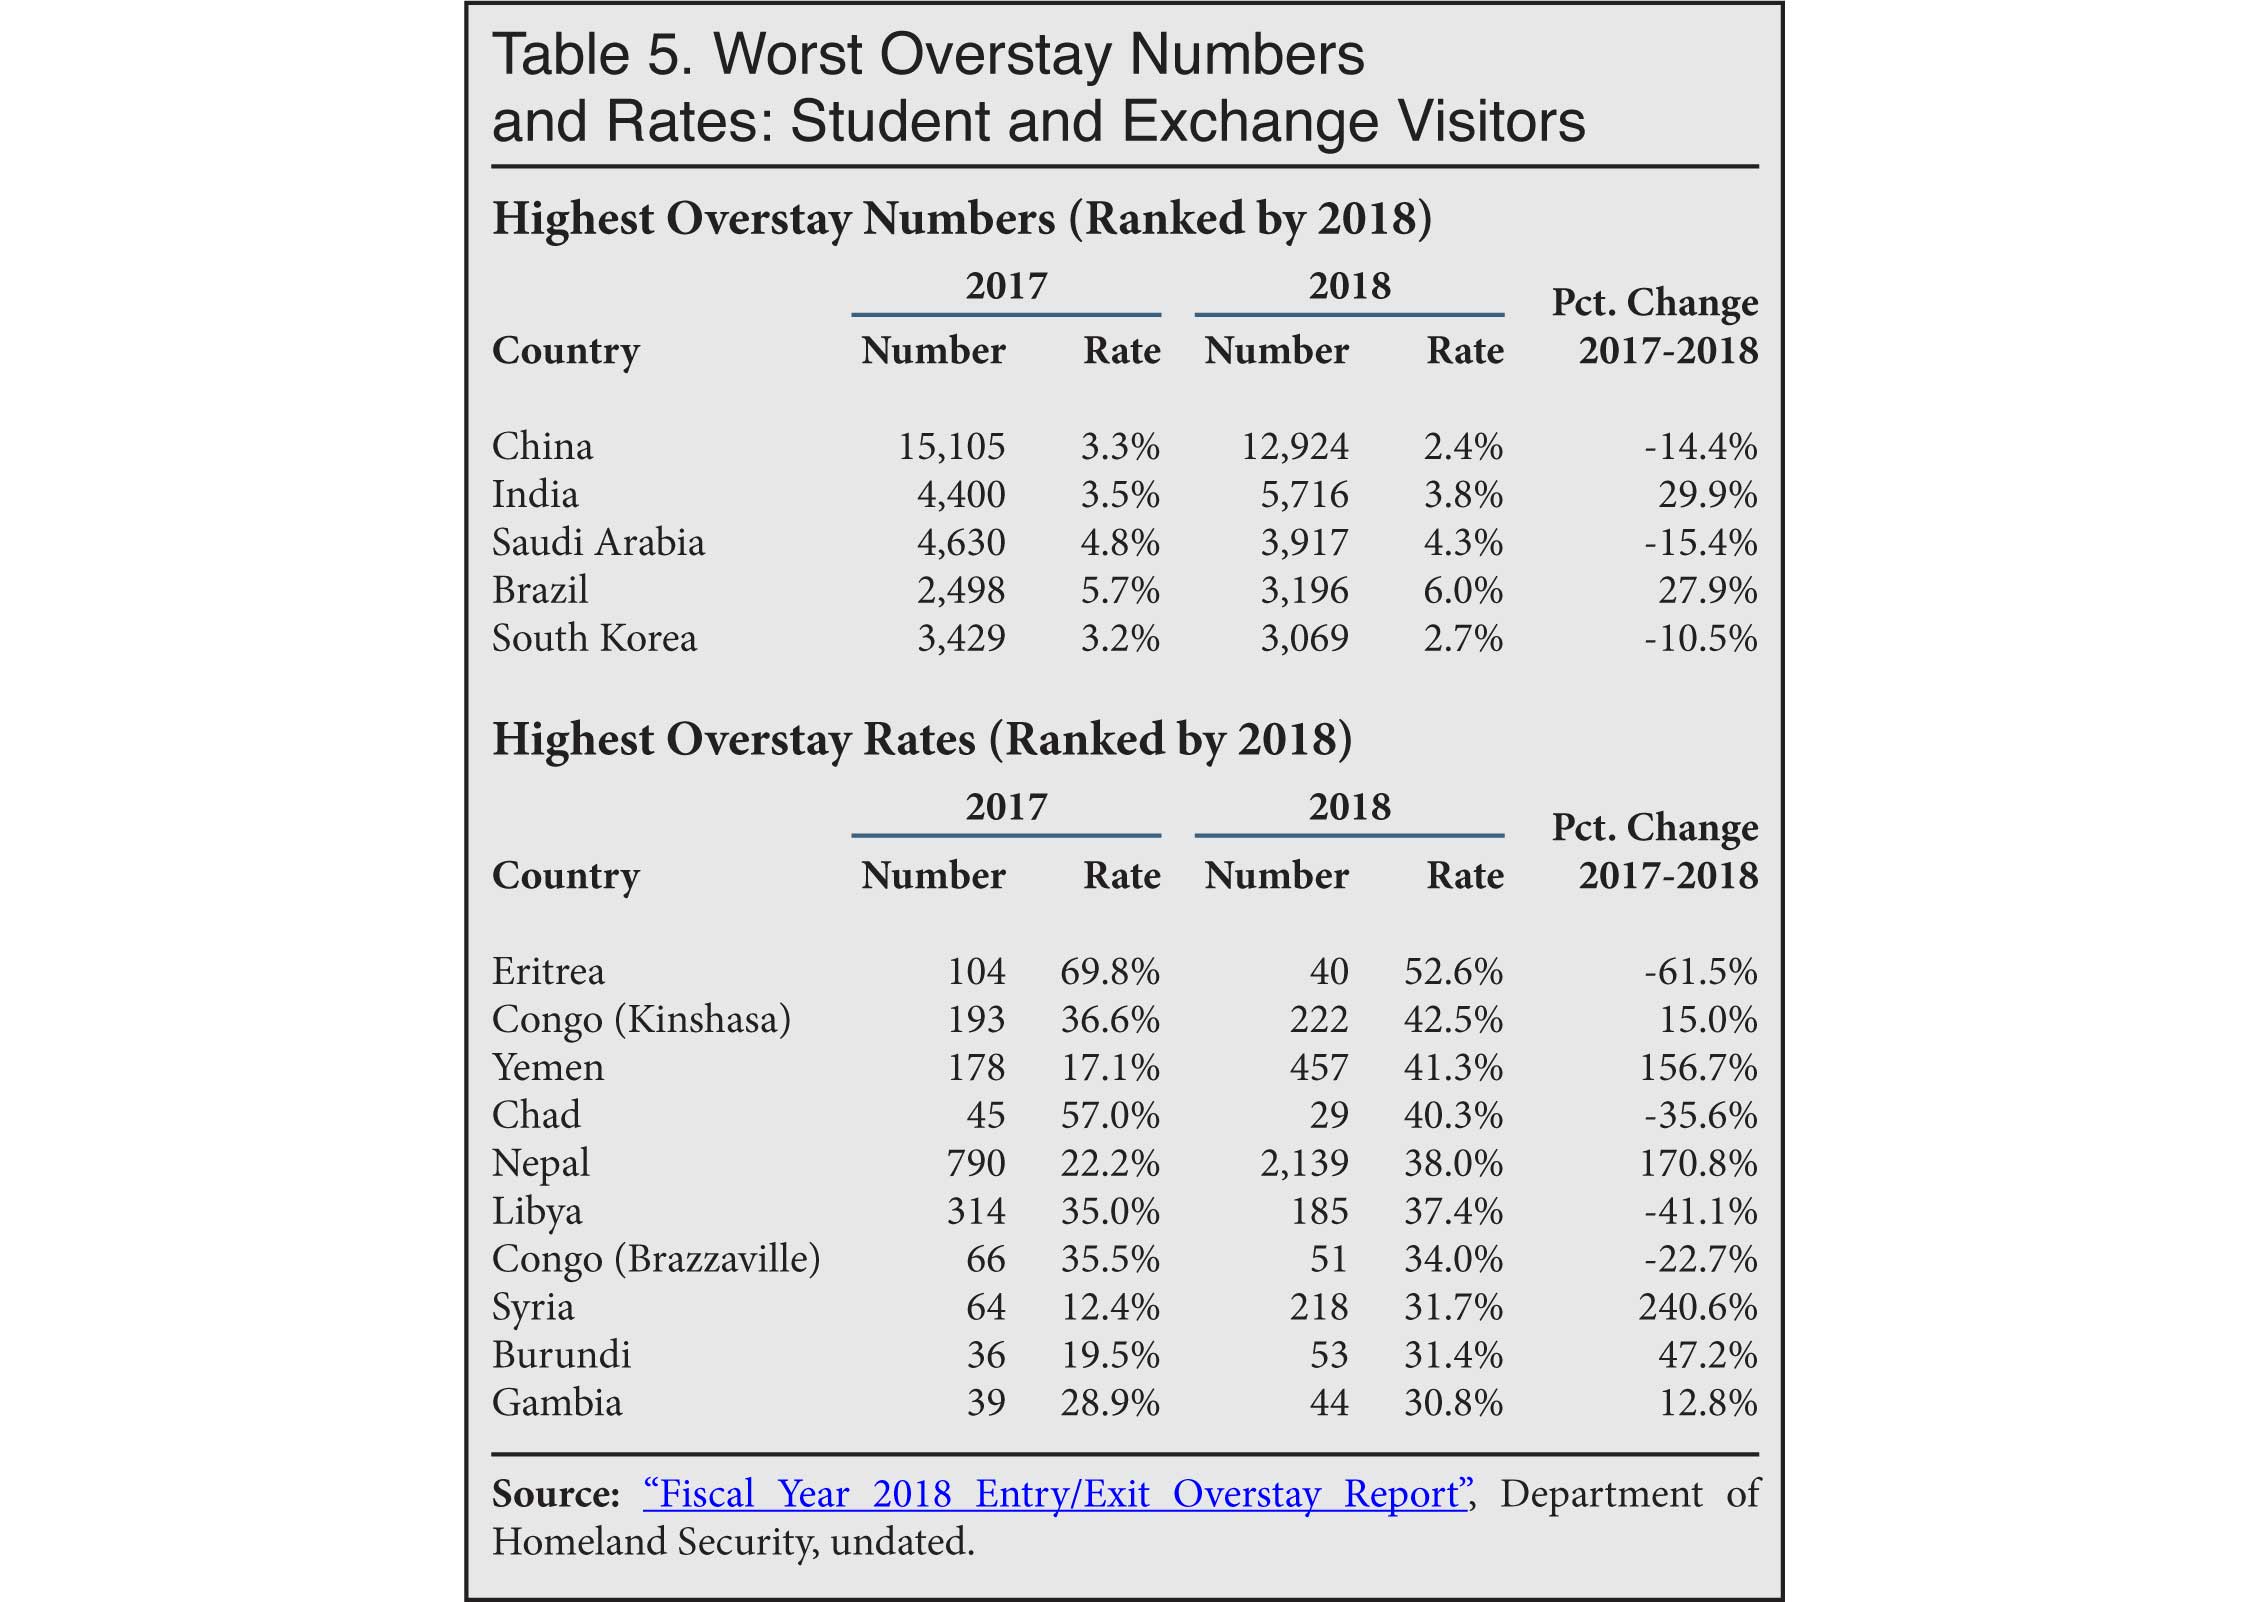 Table: Worst Visa Overstay Numbers and Rates, Student Exchange Visitors, 2018